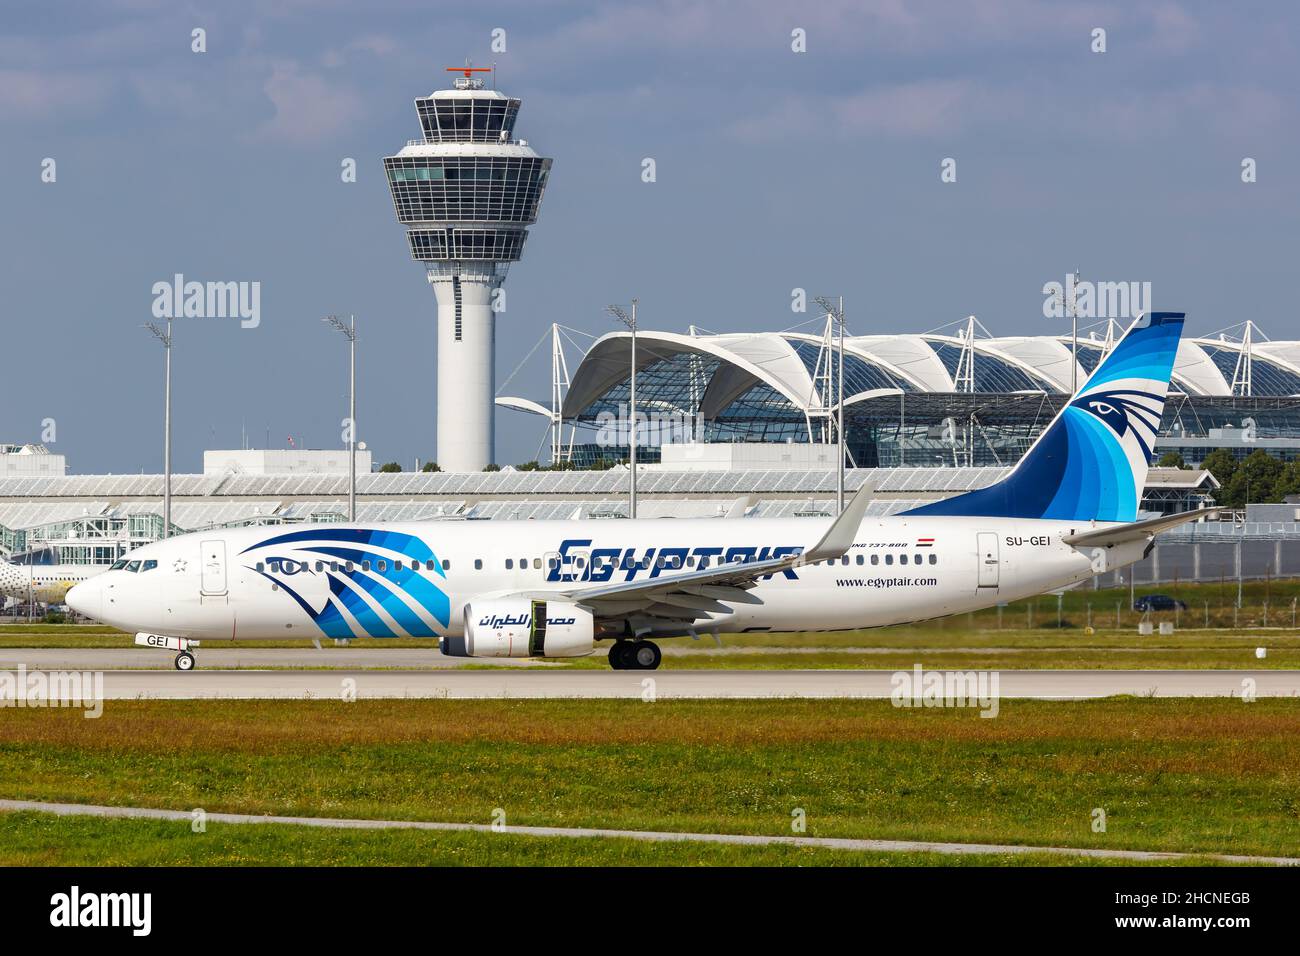 Munich, Germany - September 9, 2021: Egyptair Boeing 737-800 airplane at Munich airport (MUC) in Germany. Stock Photo